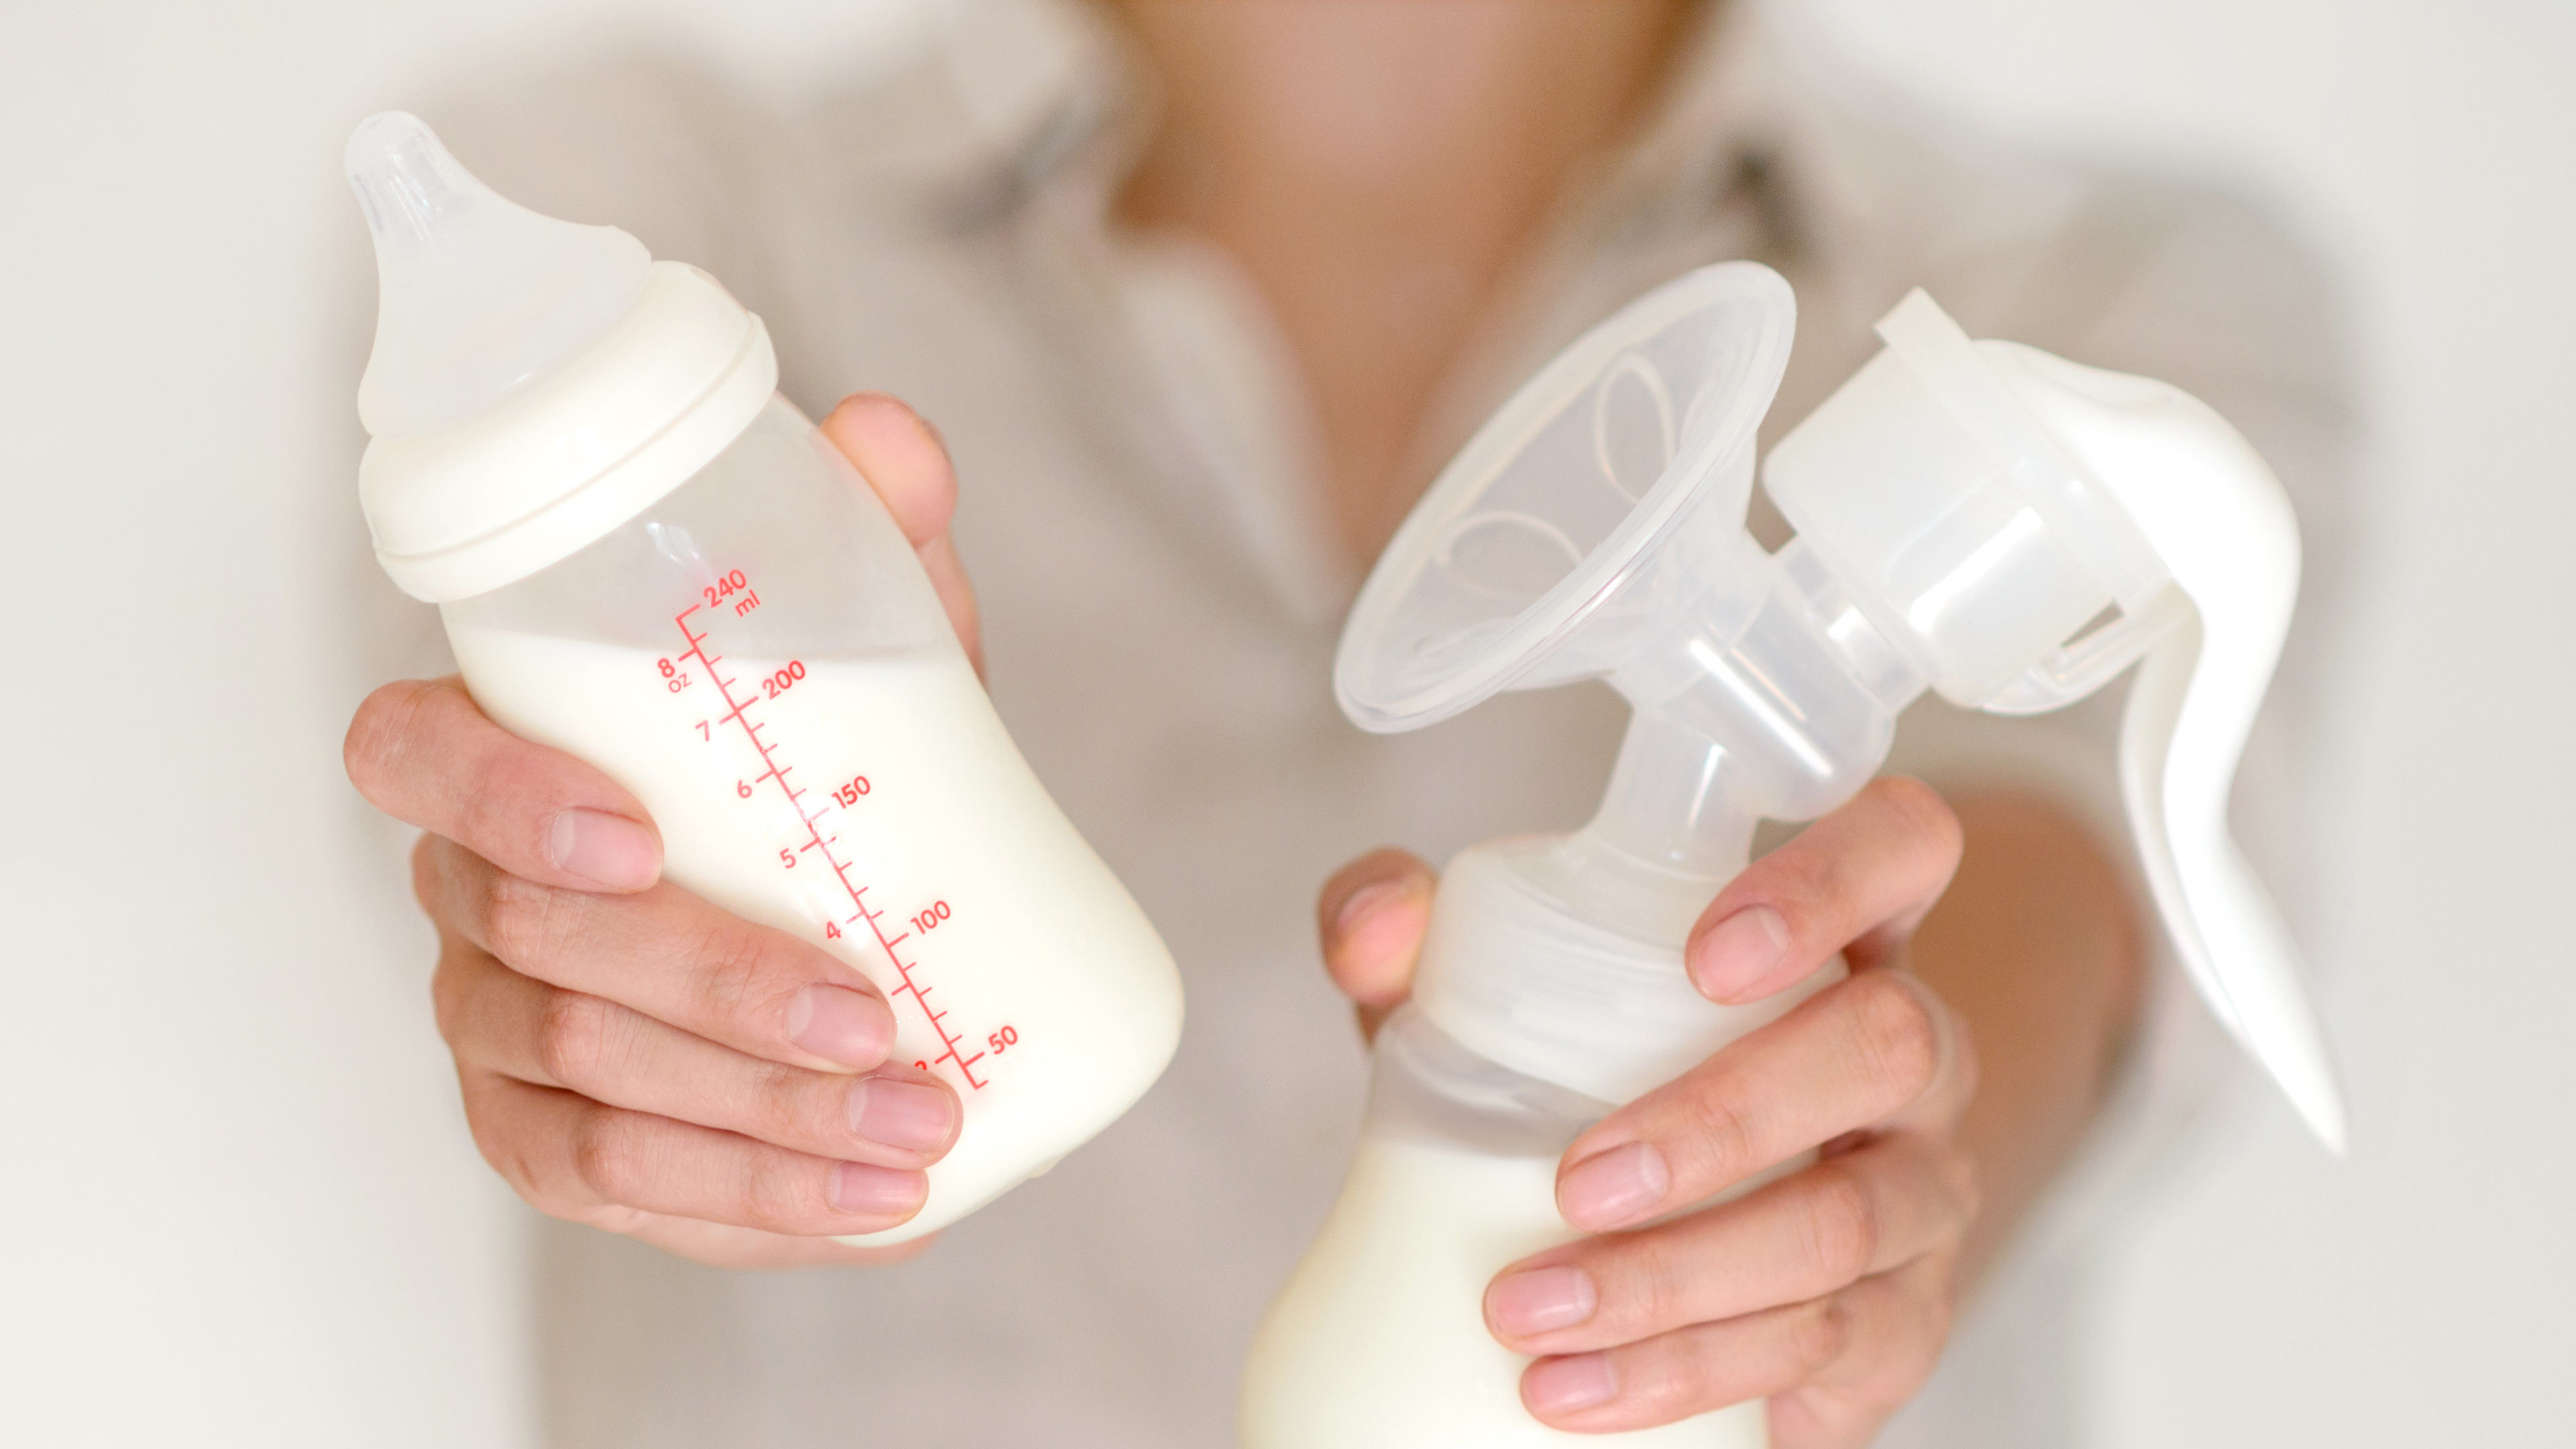 My Pumping Essentials - Breastfeeding - Exclusively Pumping